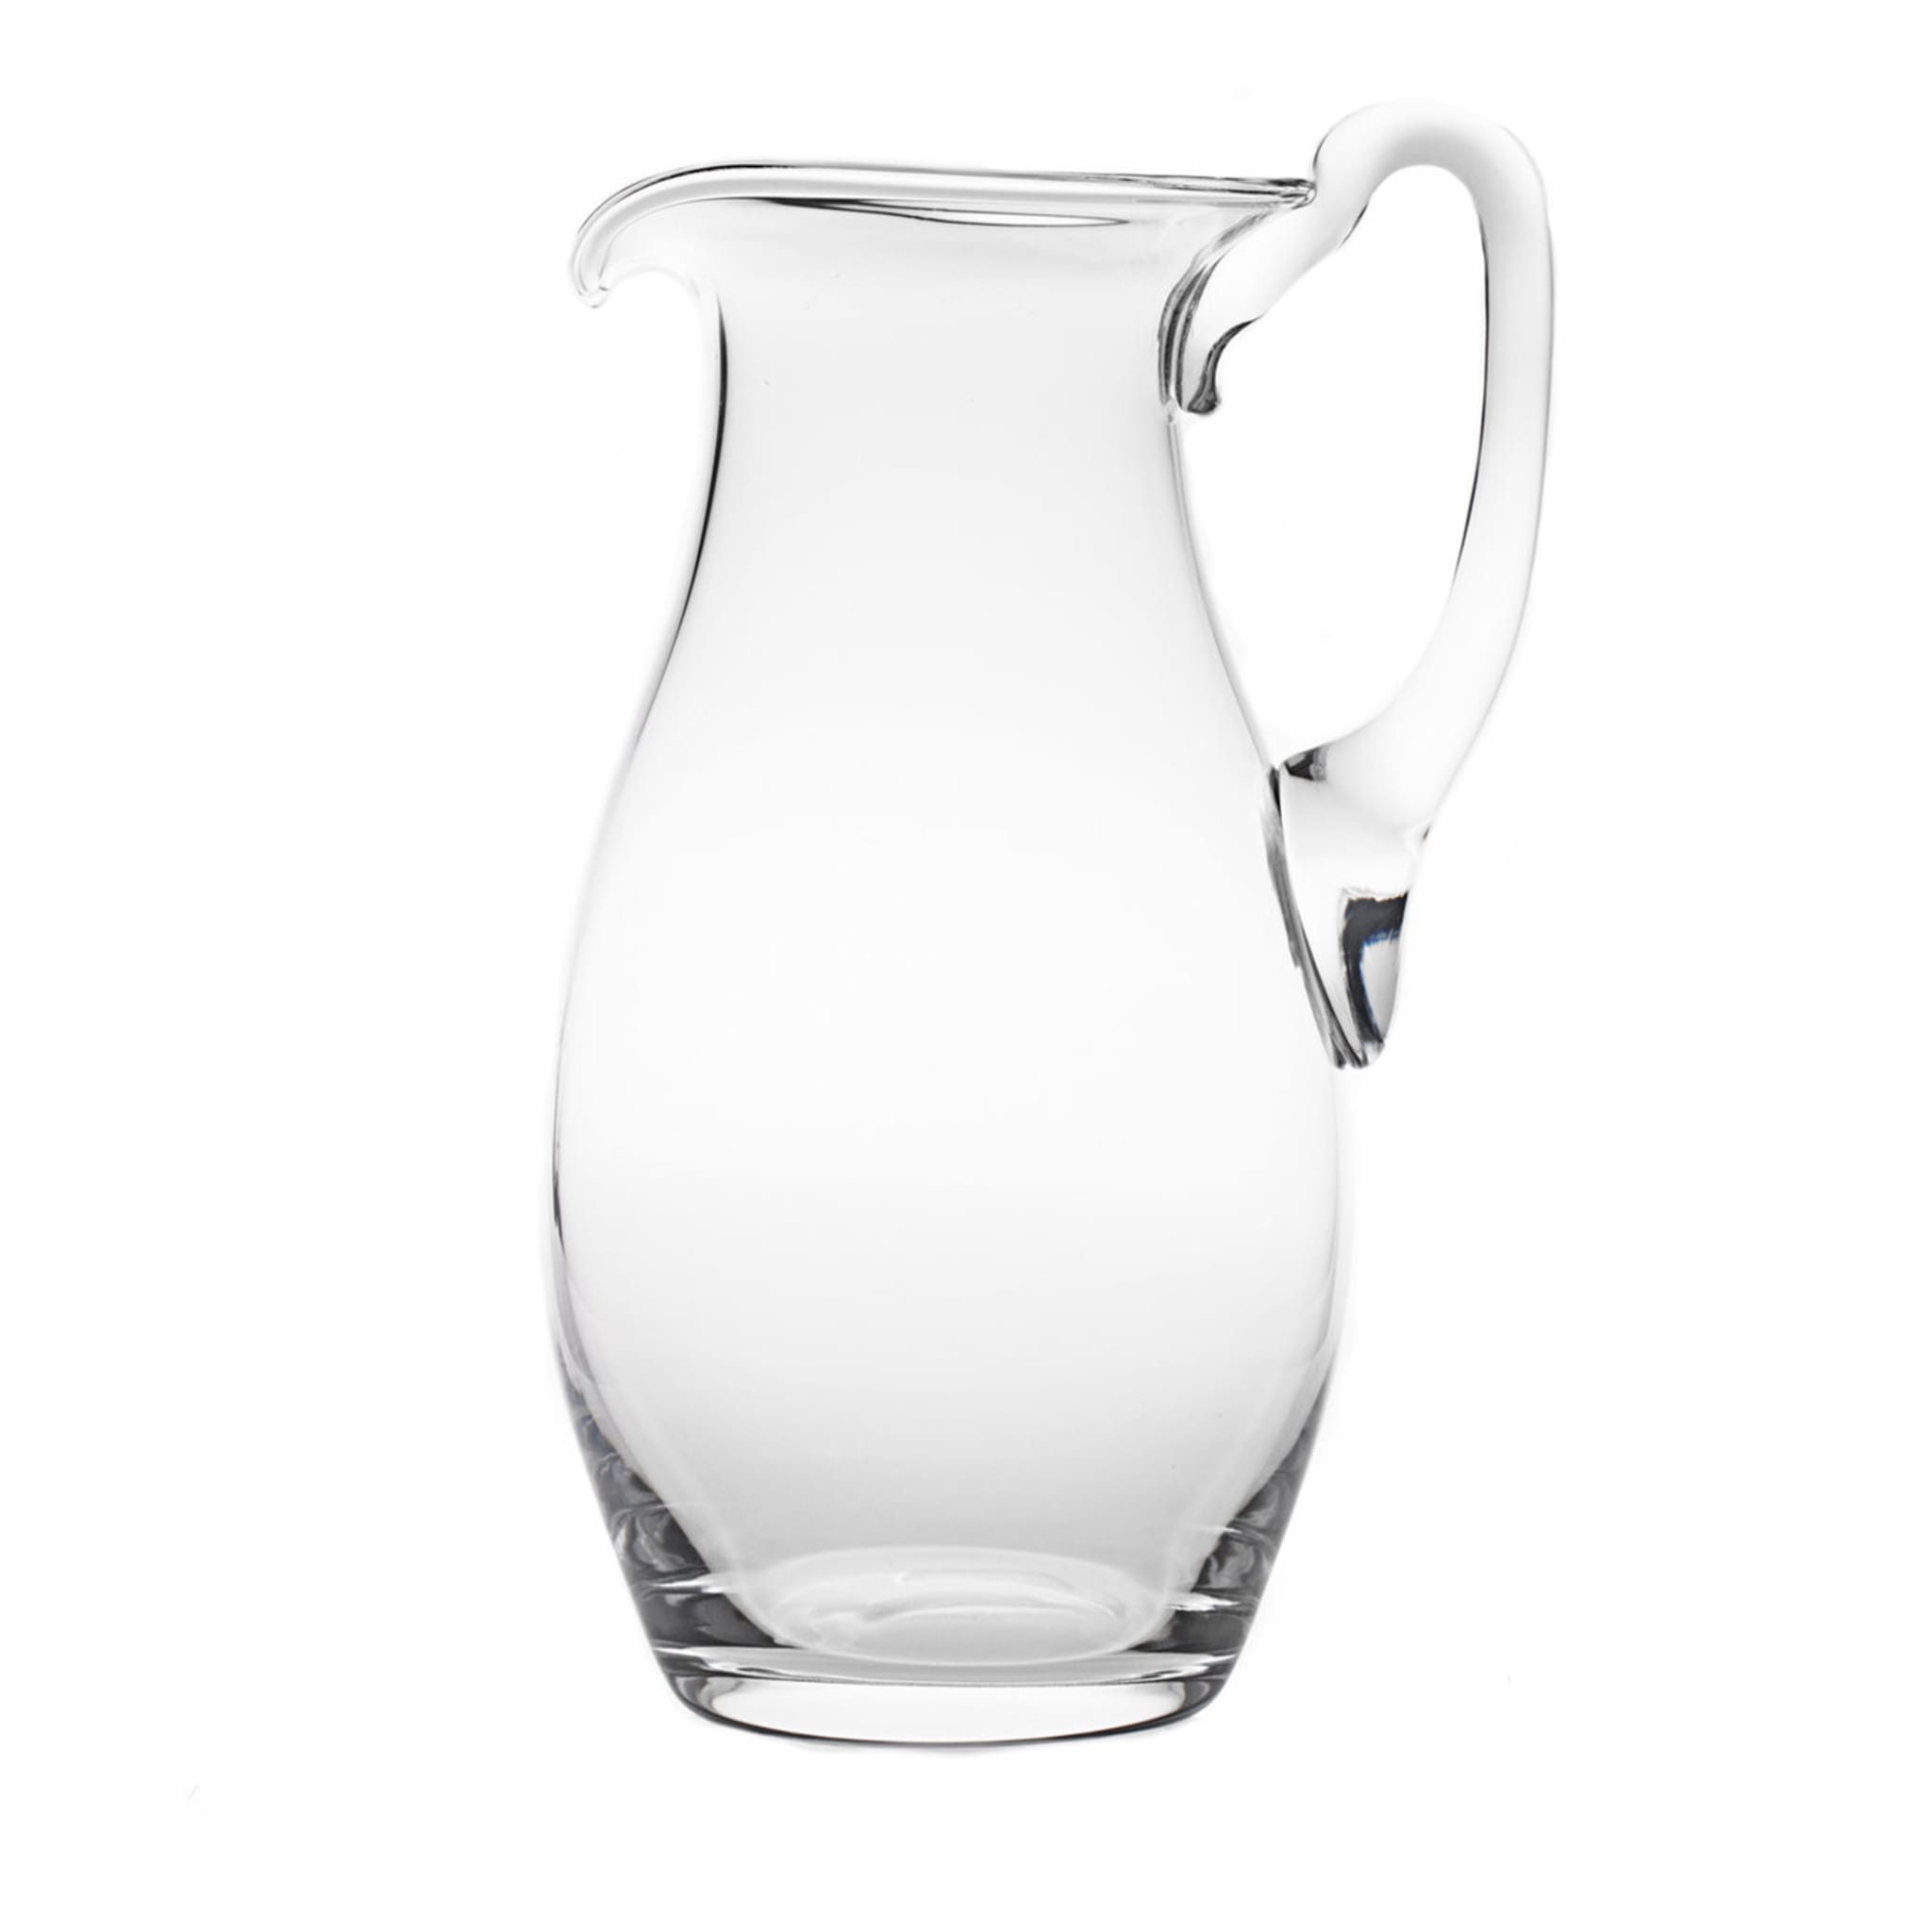 Concerto Crystal Pitcher - Main view